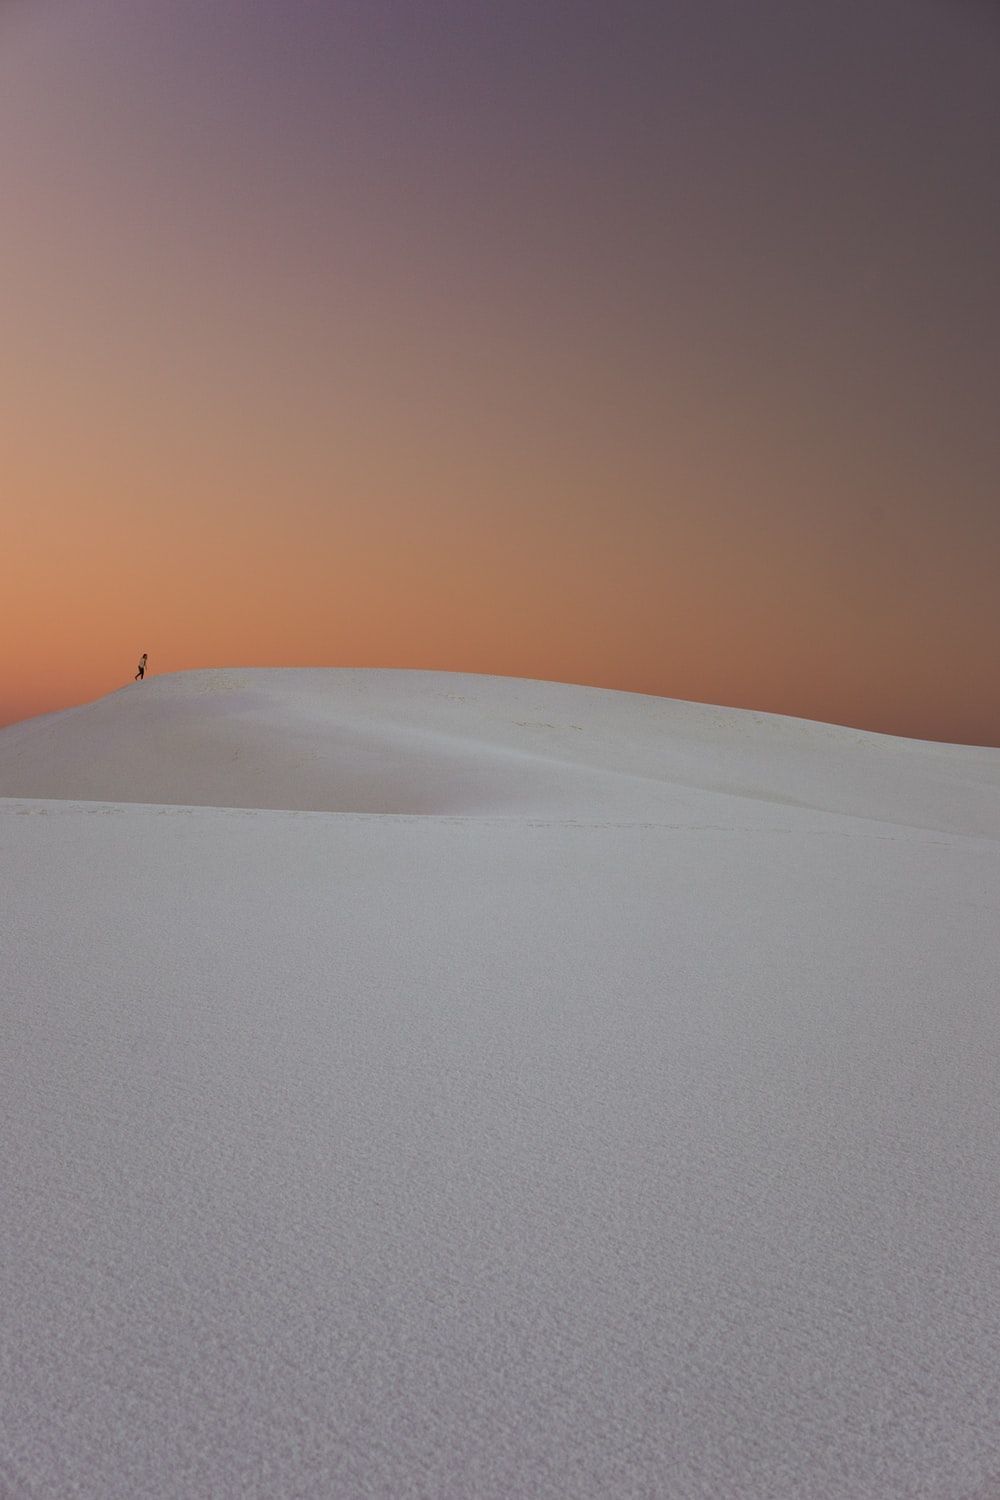 person walking in the desert dunes【2020】. 壁紙, 影, 雪